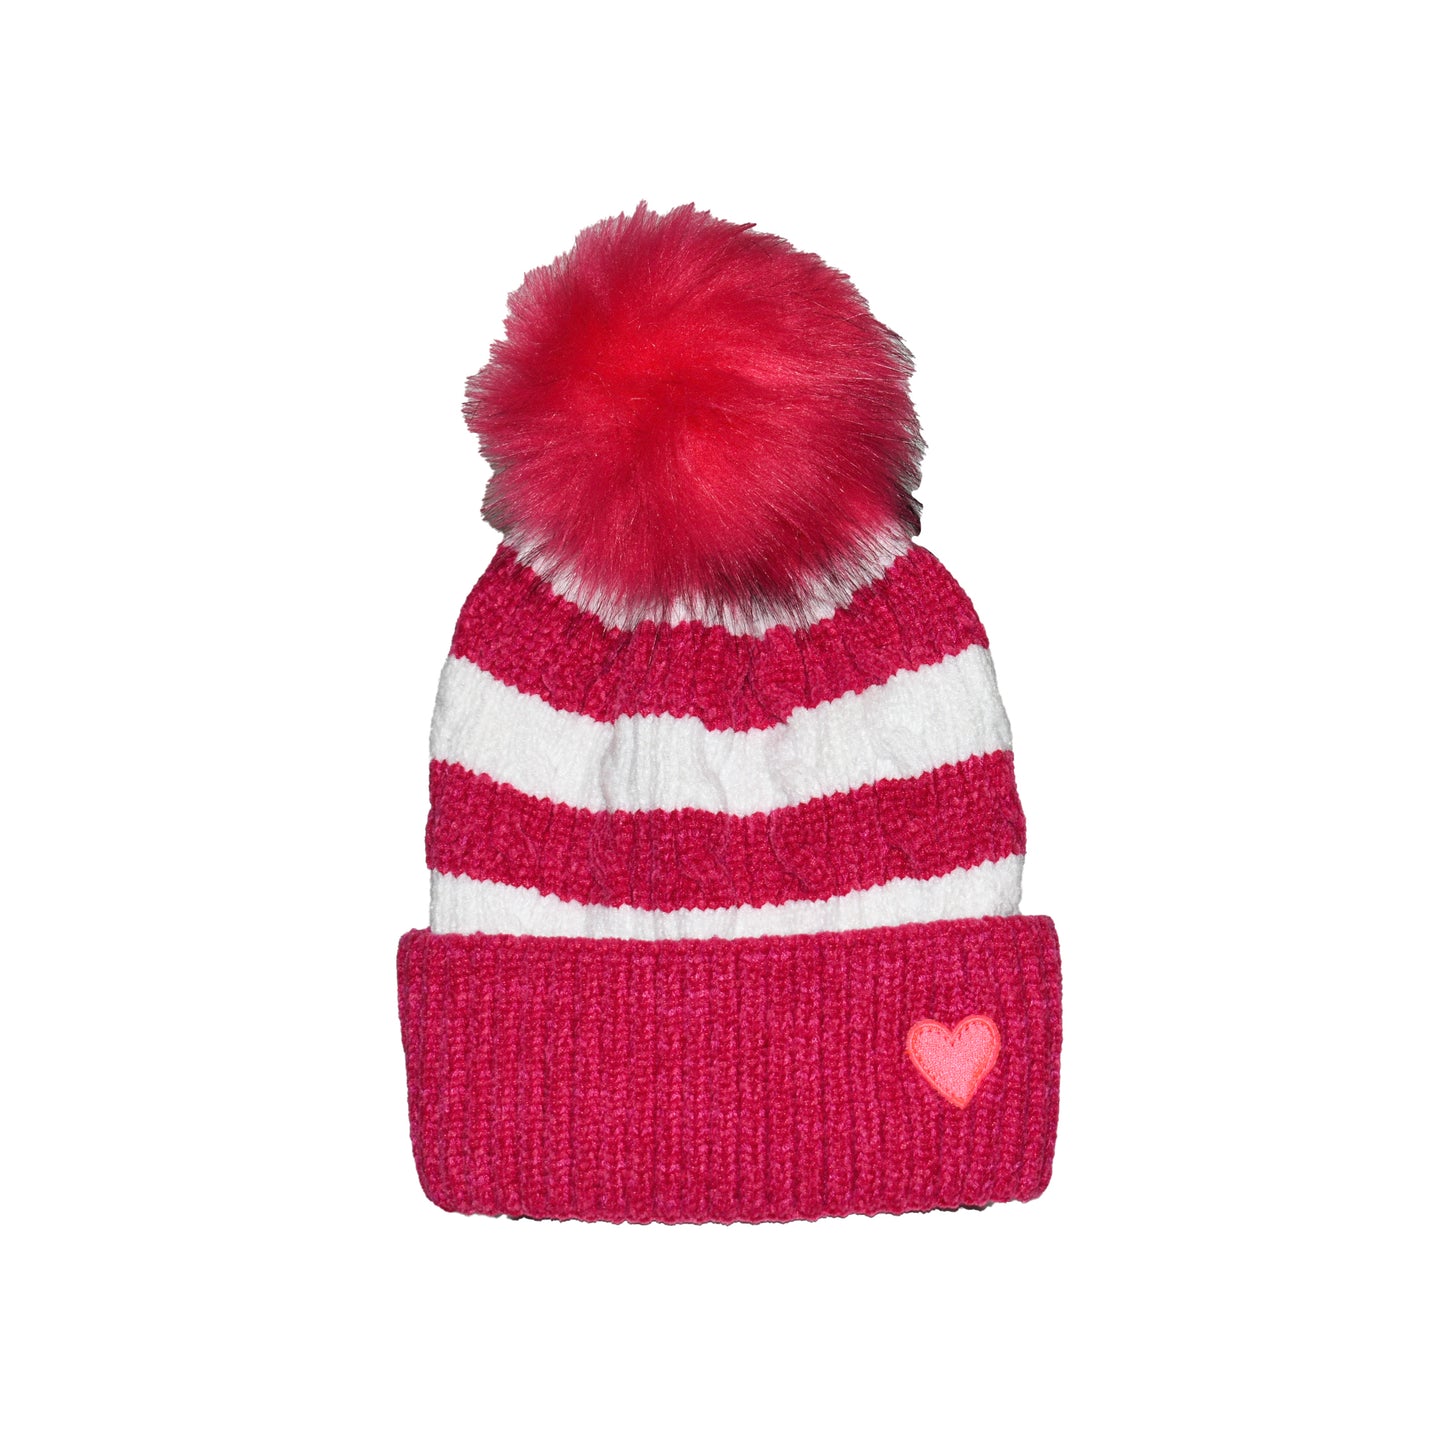 Curly Girl - Party Lines Knit Pom